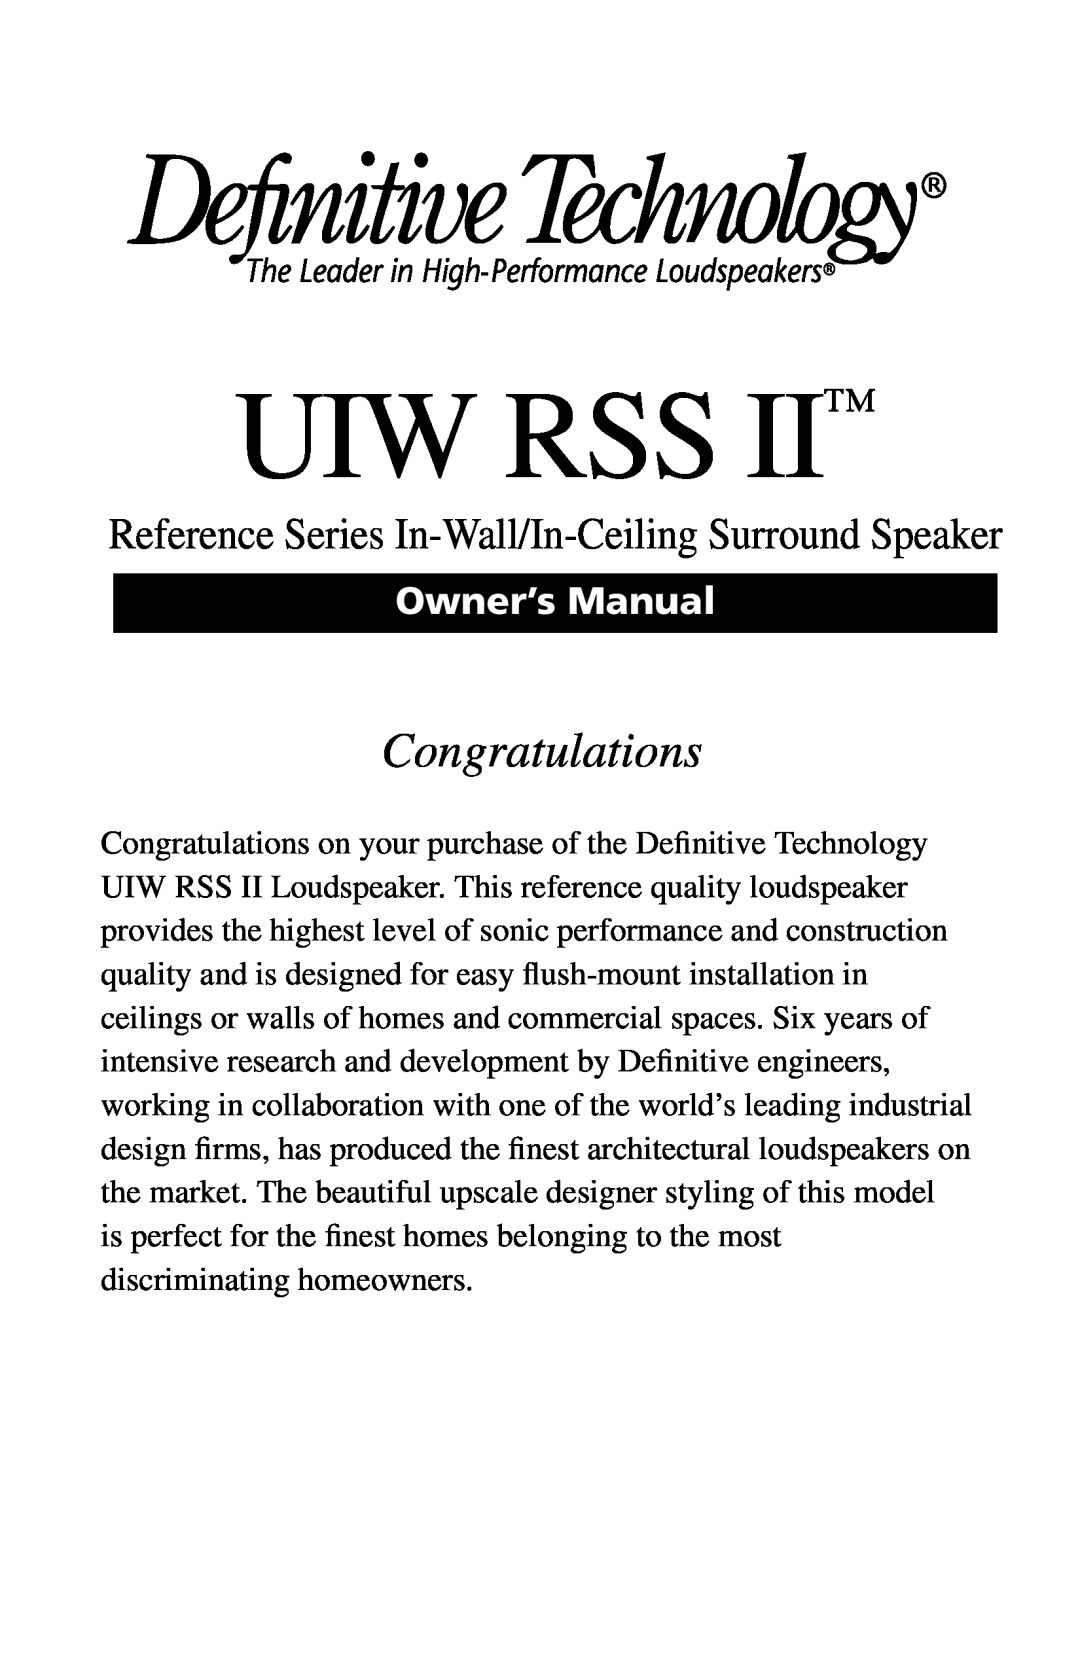 Definitive Technology RSS II owner manual Uiw Rss, Congratulations 